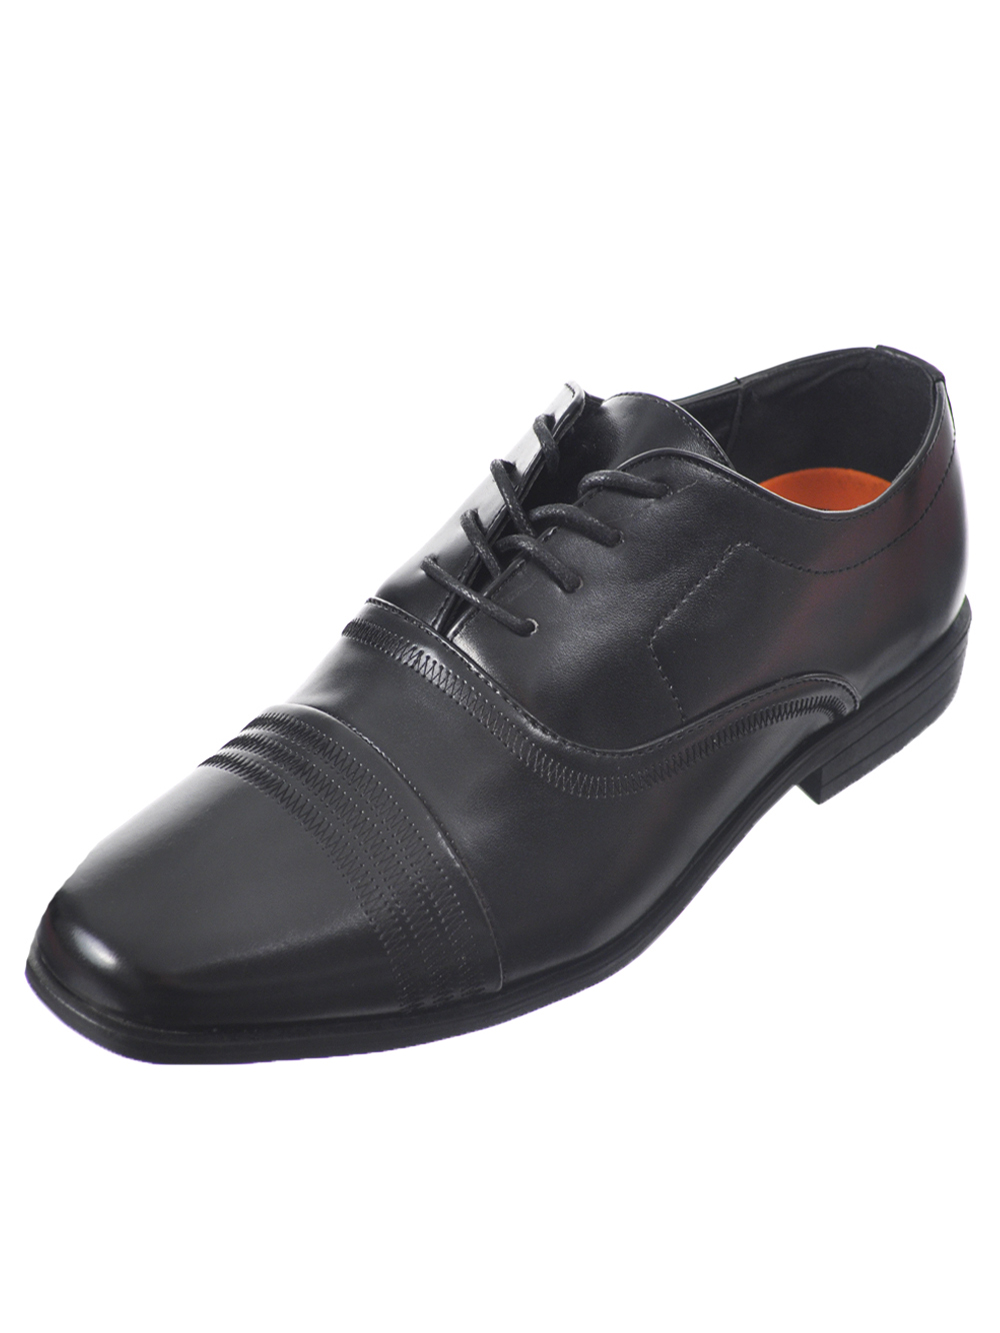 Size 7 Youth Dress Shoes for Boys